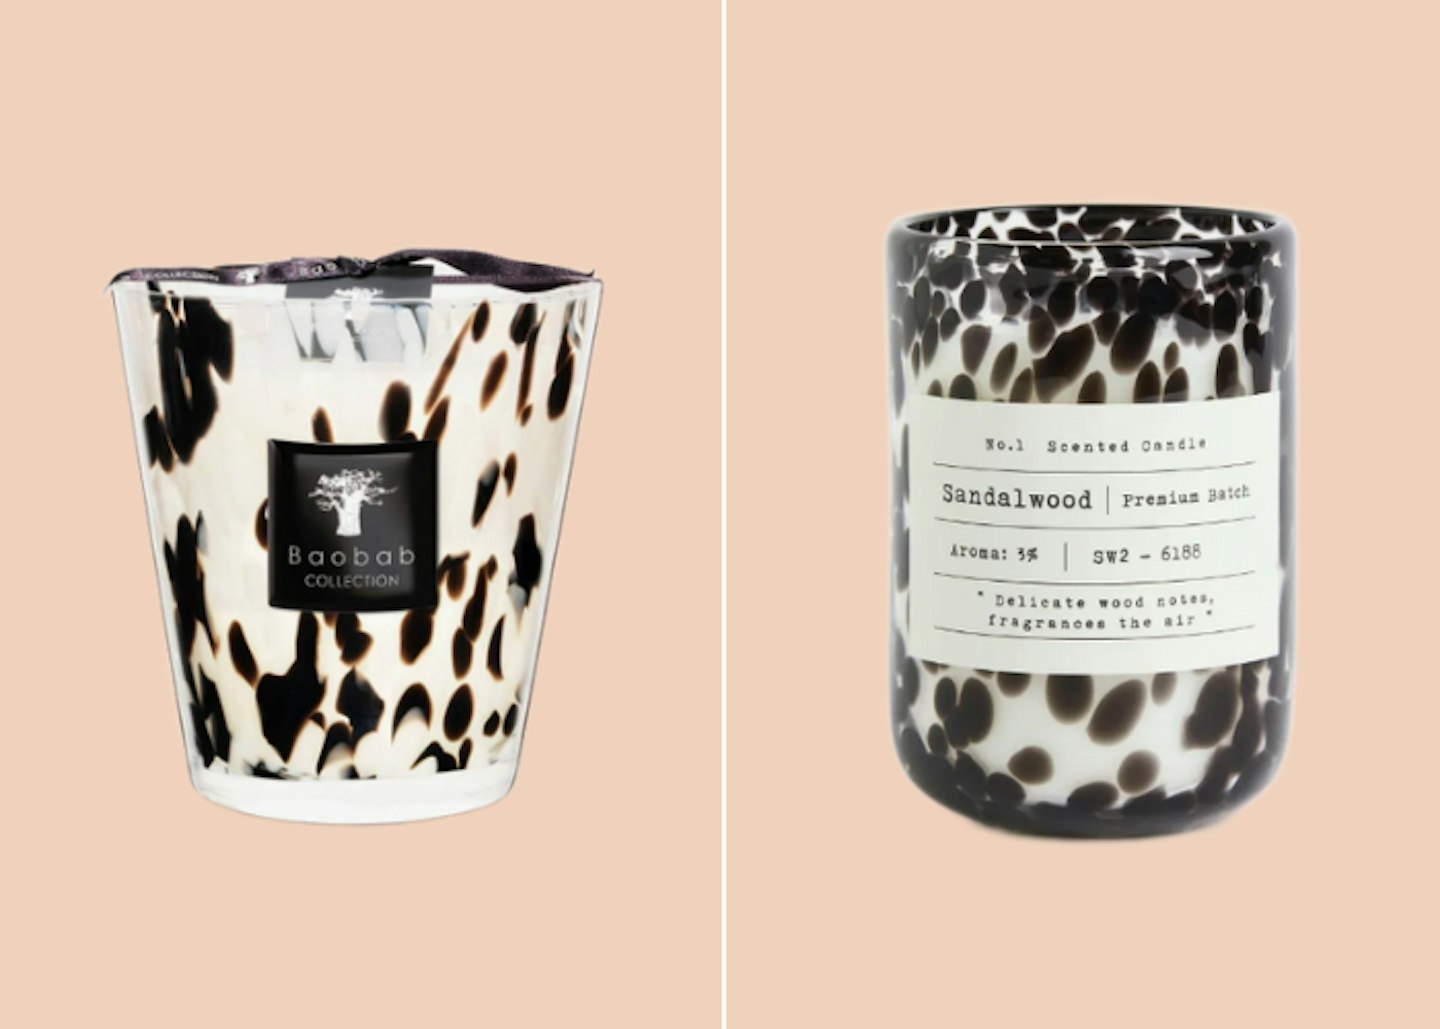 Baobab Collection Pearls Candle & H&M Sandalwood Candle 